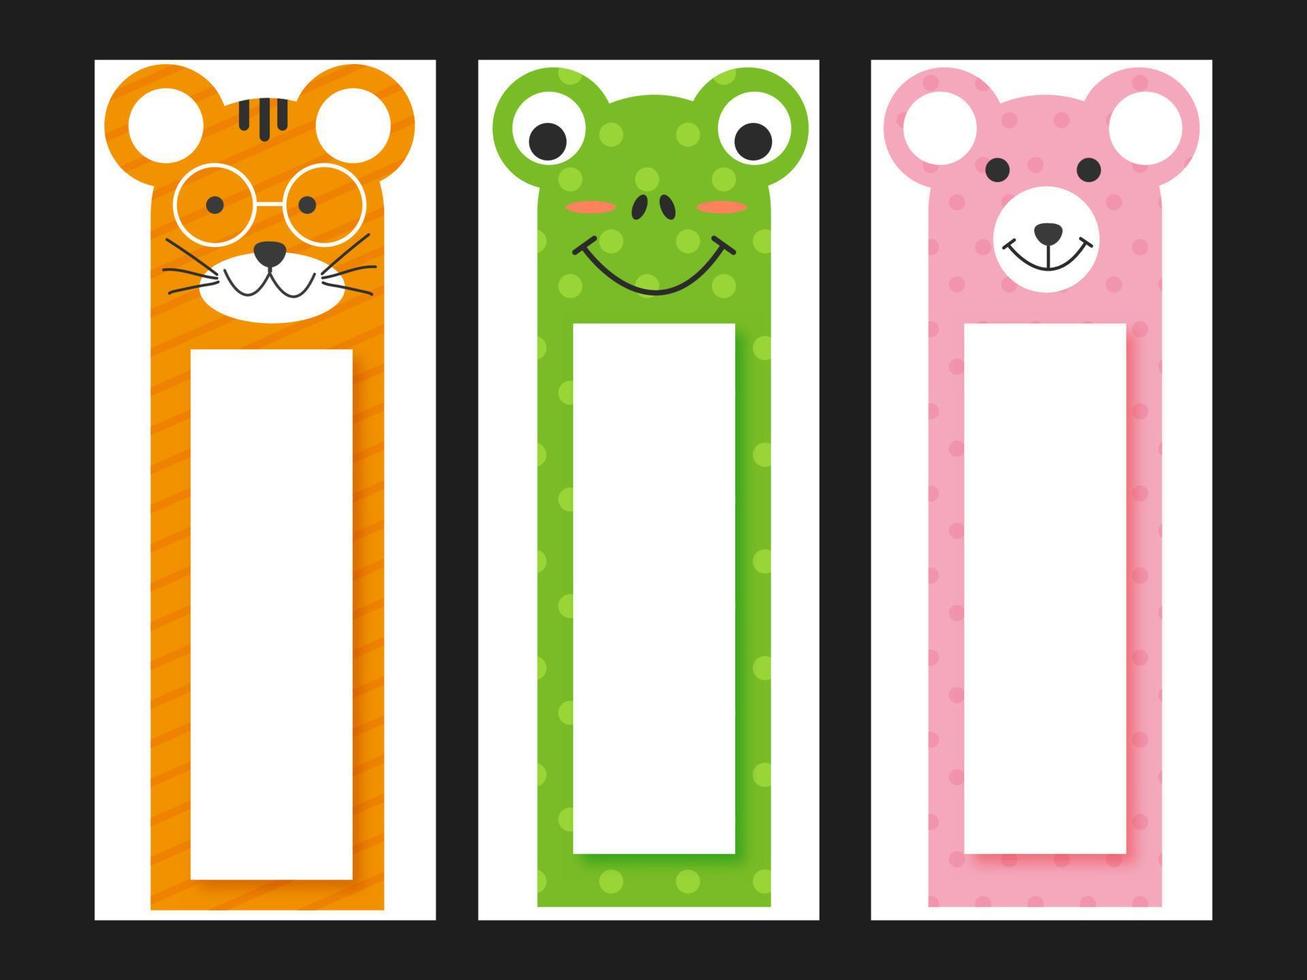 Printable Bookmarks of Cartoon Cat, Frog, Bear with Space For Message. vector